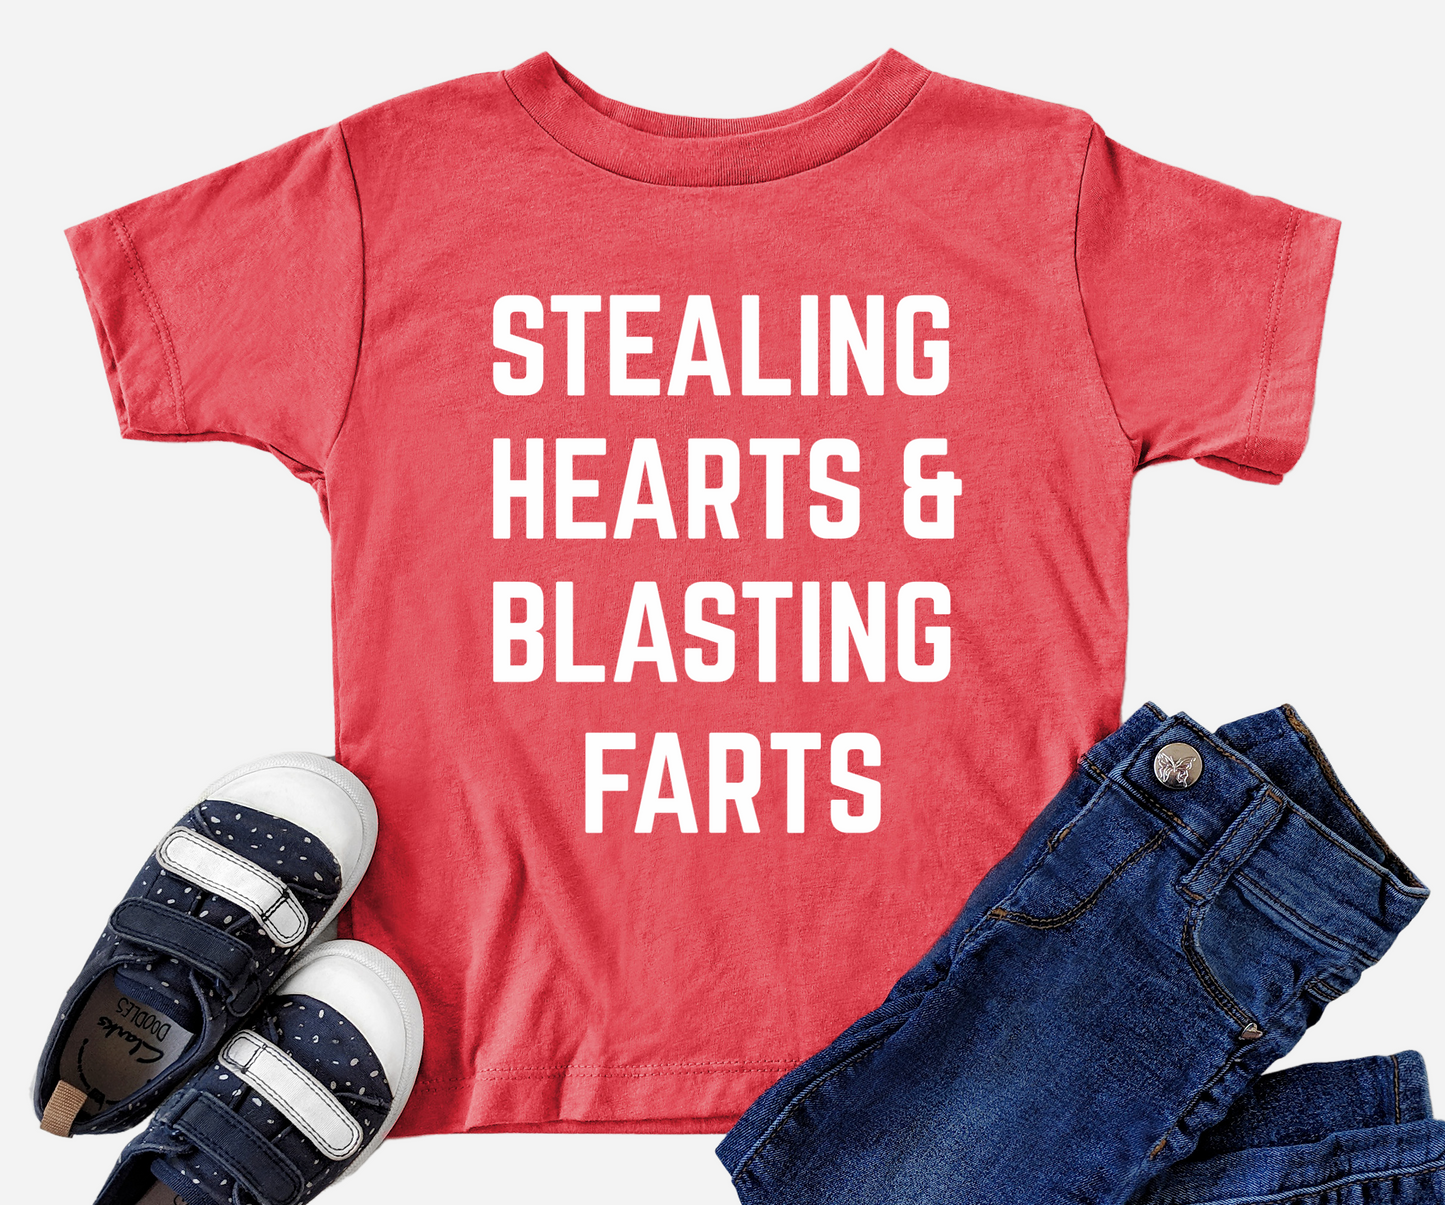 Stealing Hearts And Blasting Farts - available in 2T- 3XL